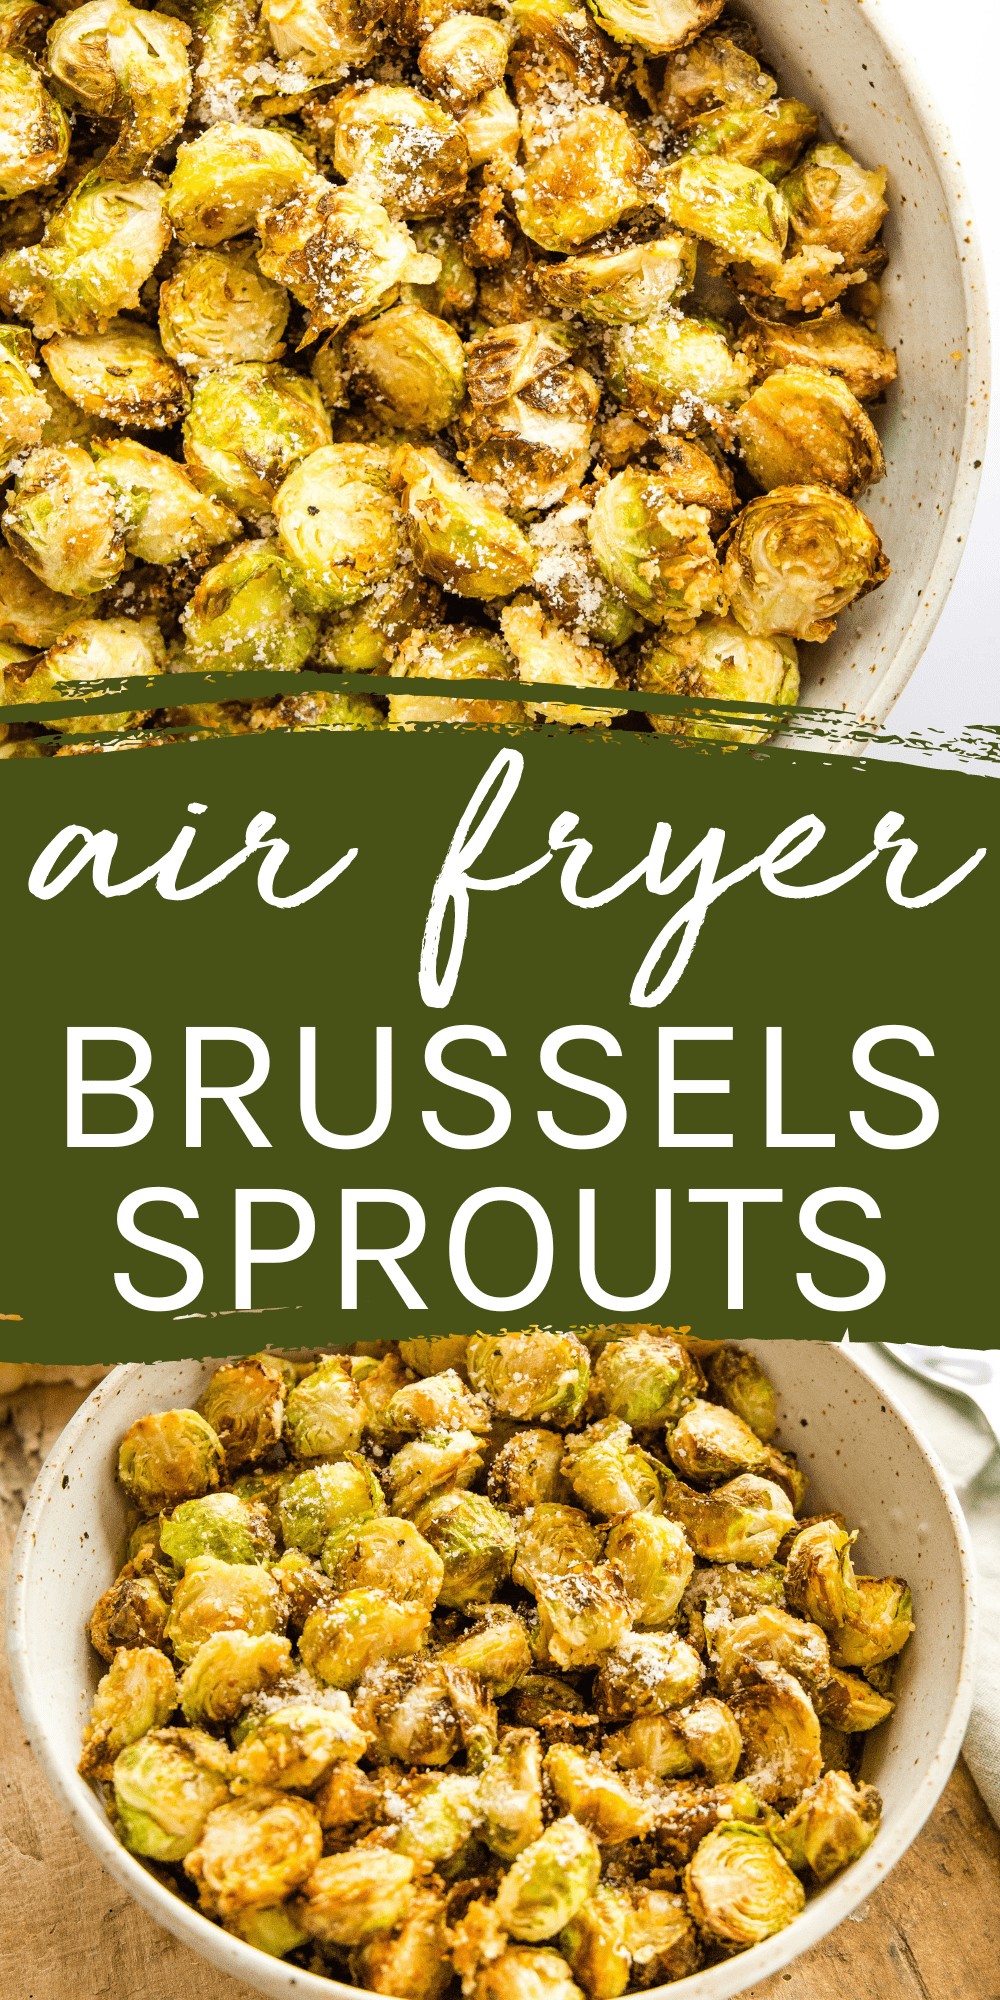 This Air Fryer Brussels Spouts recipe is the perfect healthy side dish that's ready in 20 minutes or less. Perfectly seasoned and tender with oven-roasted flavour. Recipe from thebusybaker.ca! #airfryerbrusselssprouts #brusselsprouts #airfryerveggies #airfryersidedish #airfryerrecipe #airfryer #brusselssprouts via @busybakerblog